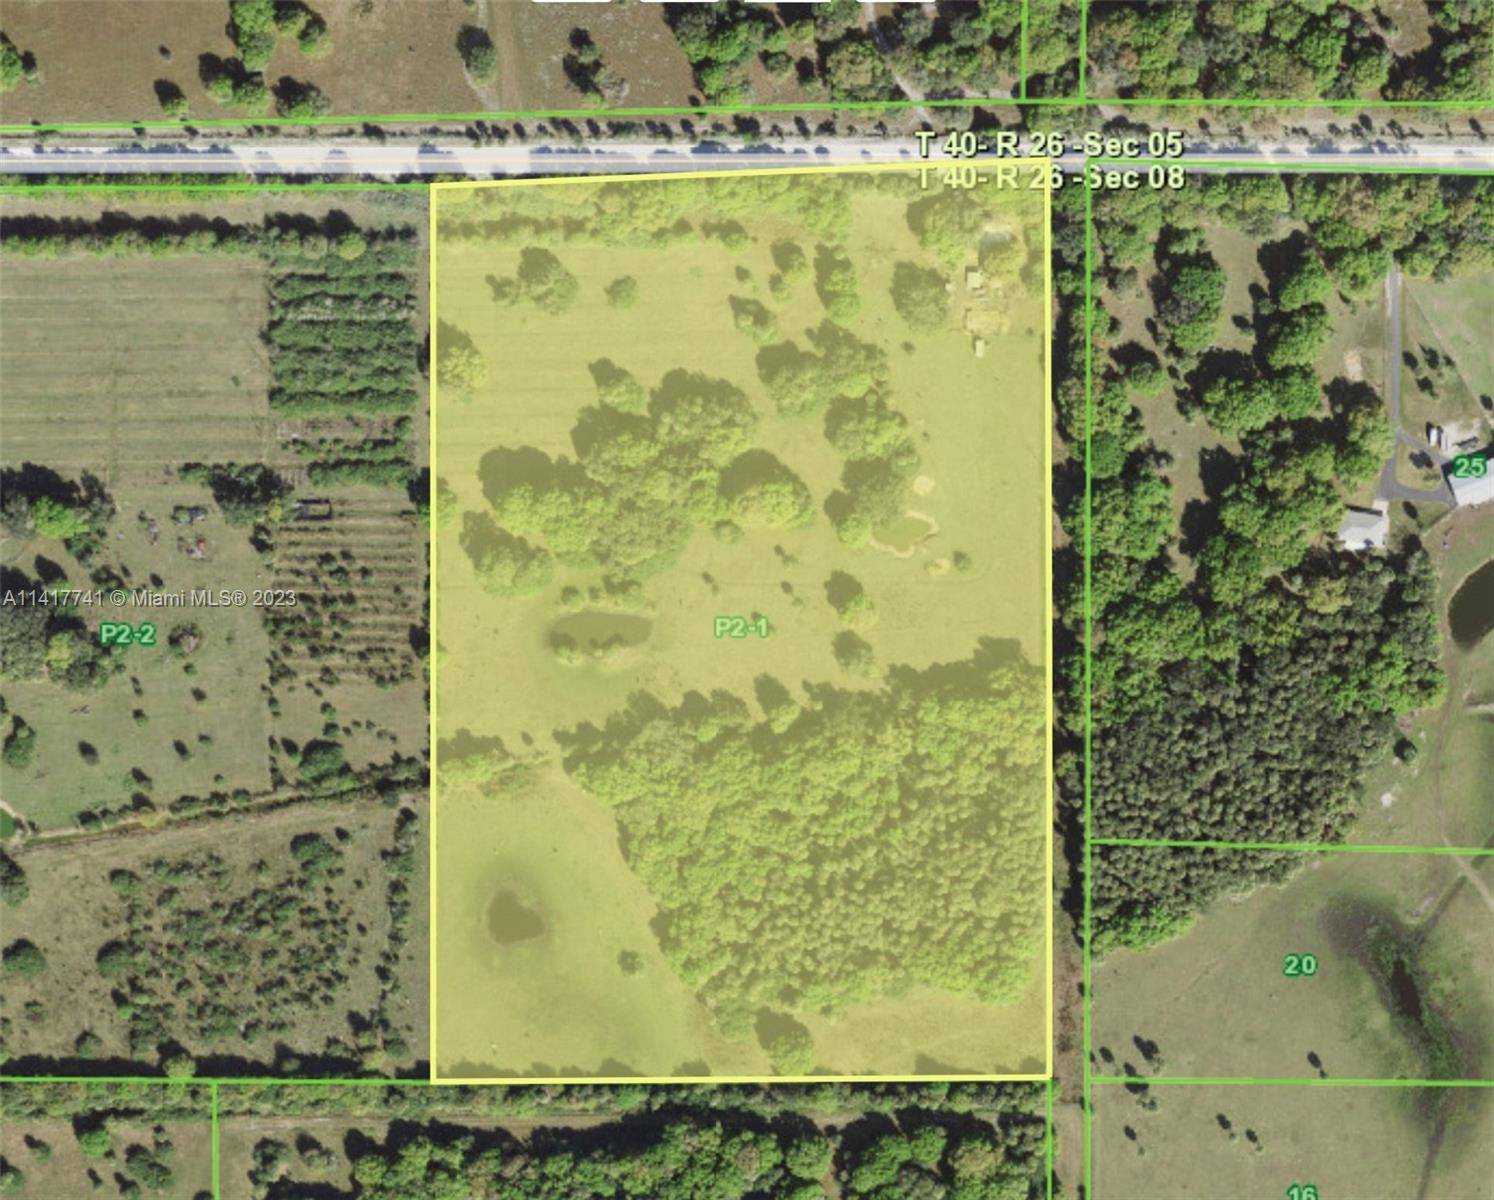 Attention Investors ! Don't miss out on this incredible opportunity to own 27 acre ranch in the peaceful and idyllic surroundings of Punta Gorda, Florida.